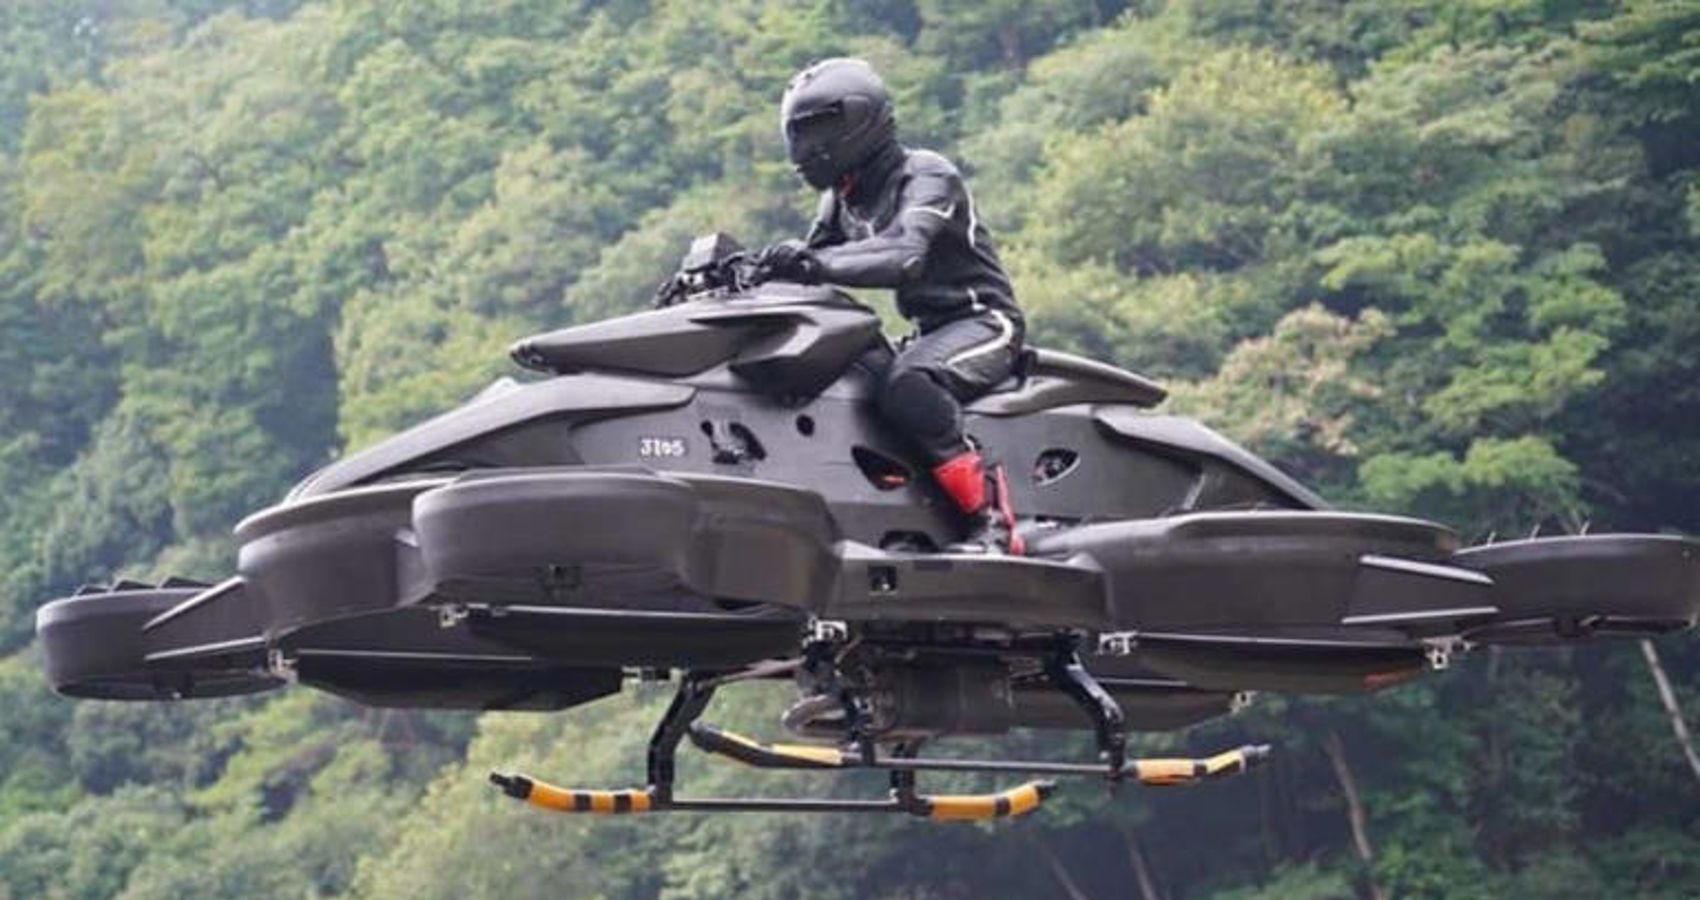 travel 1000 meters with a hover bike